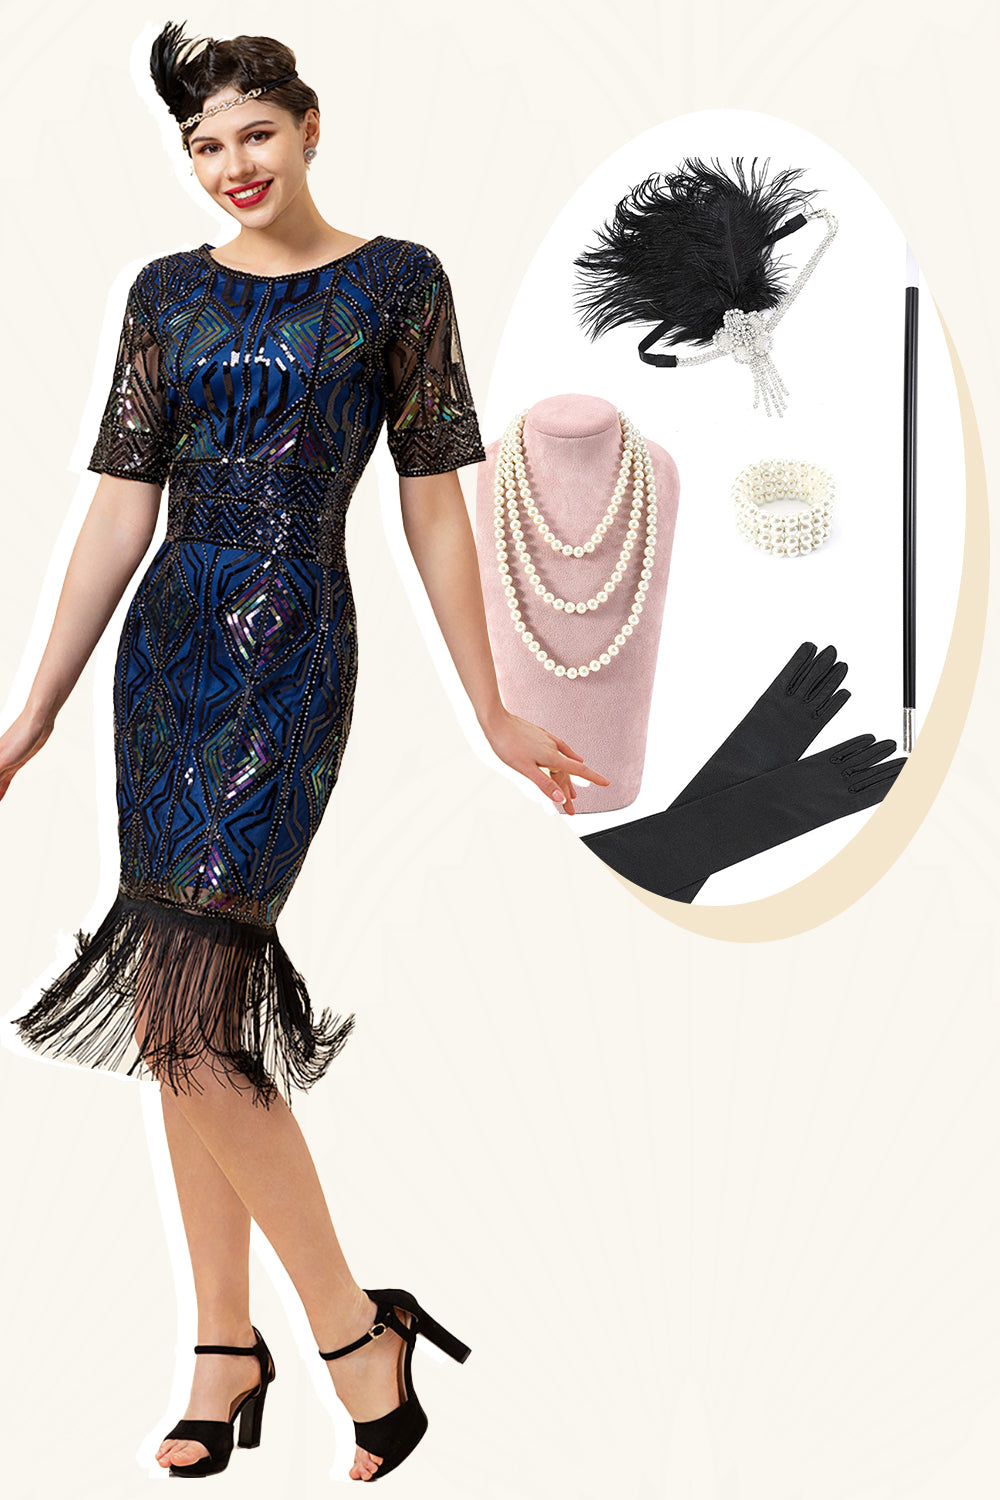 Navy Sequins Fringes Flapper Dress with 1920s Accessories Set